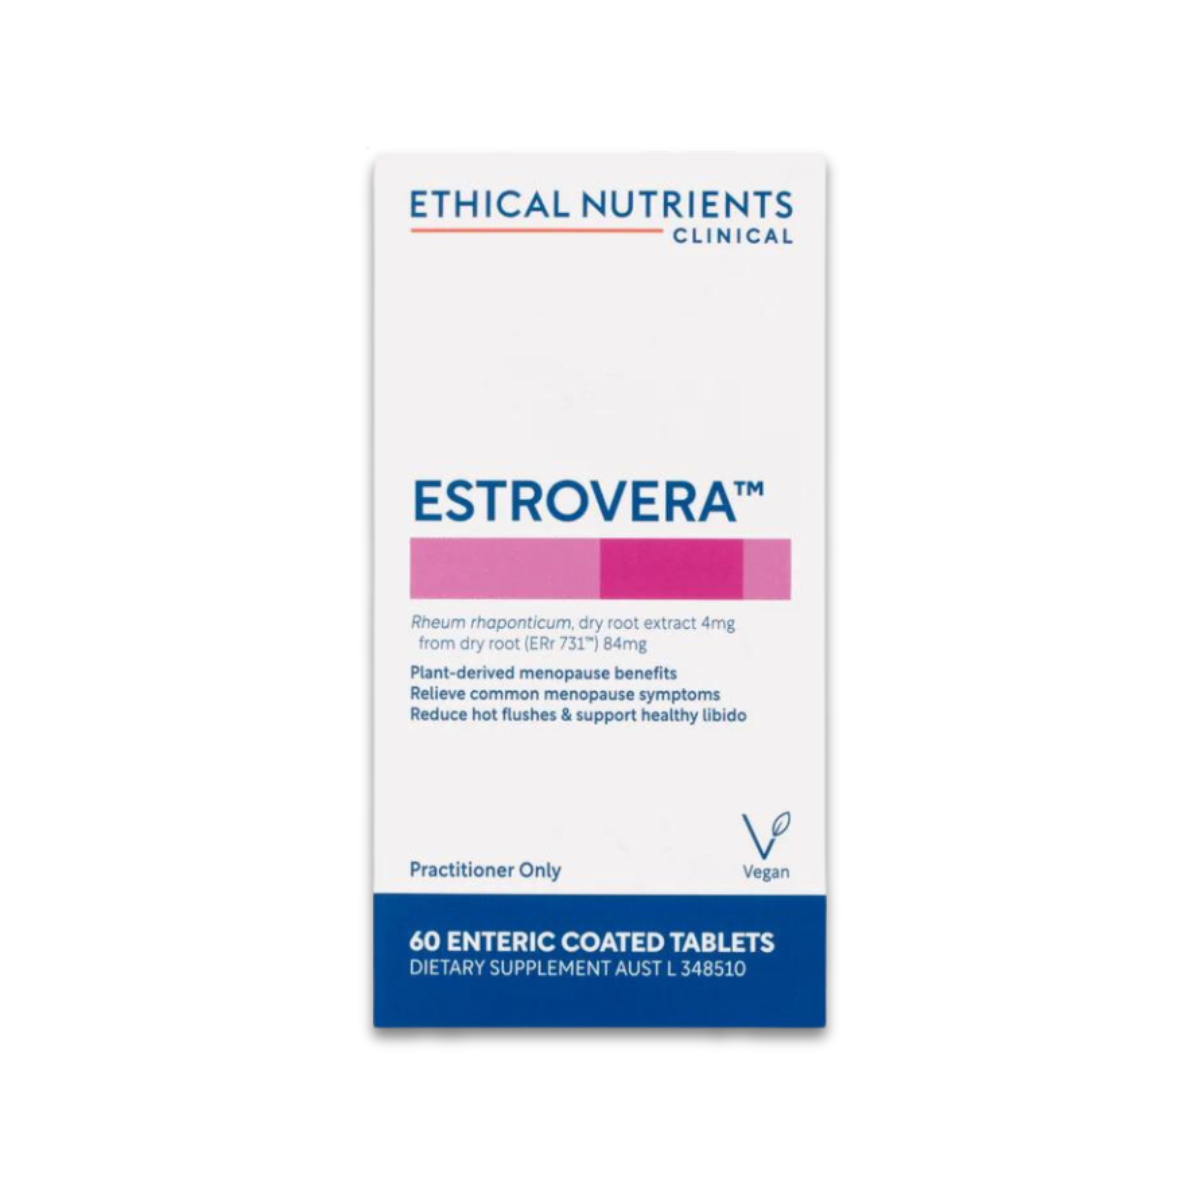 Ethical Nutrients Clinical Estrovera 60 Enteric Coated tablets